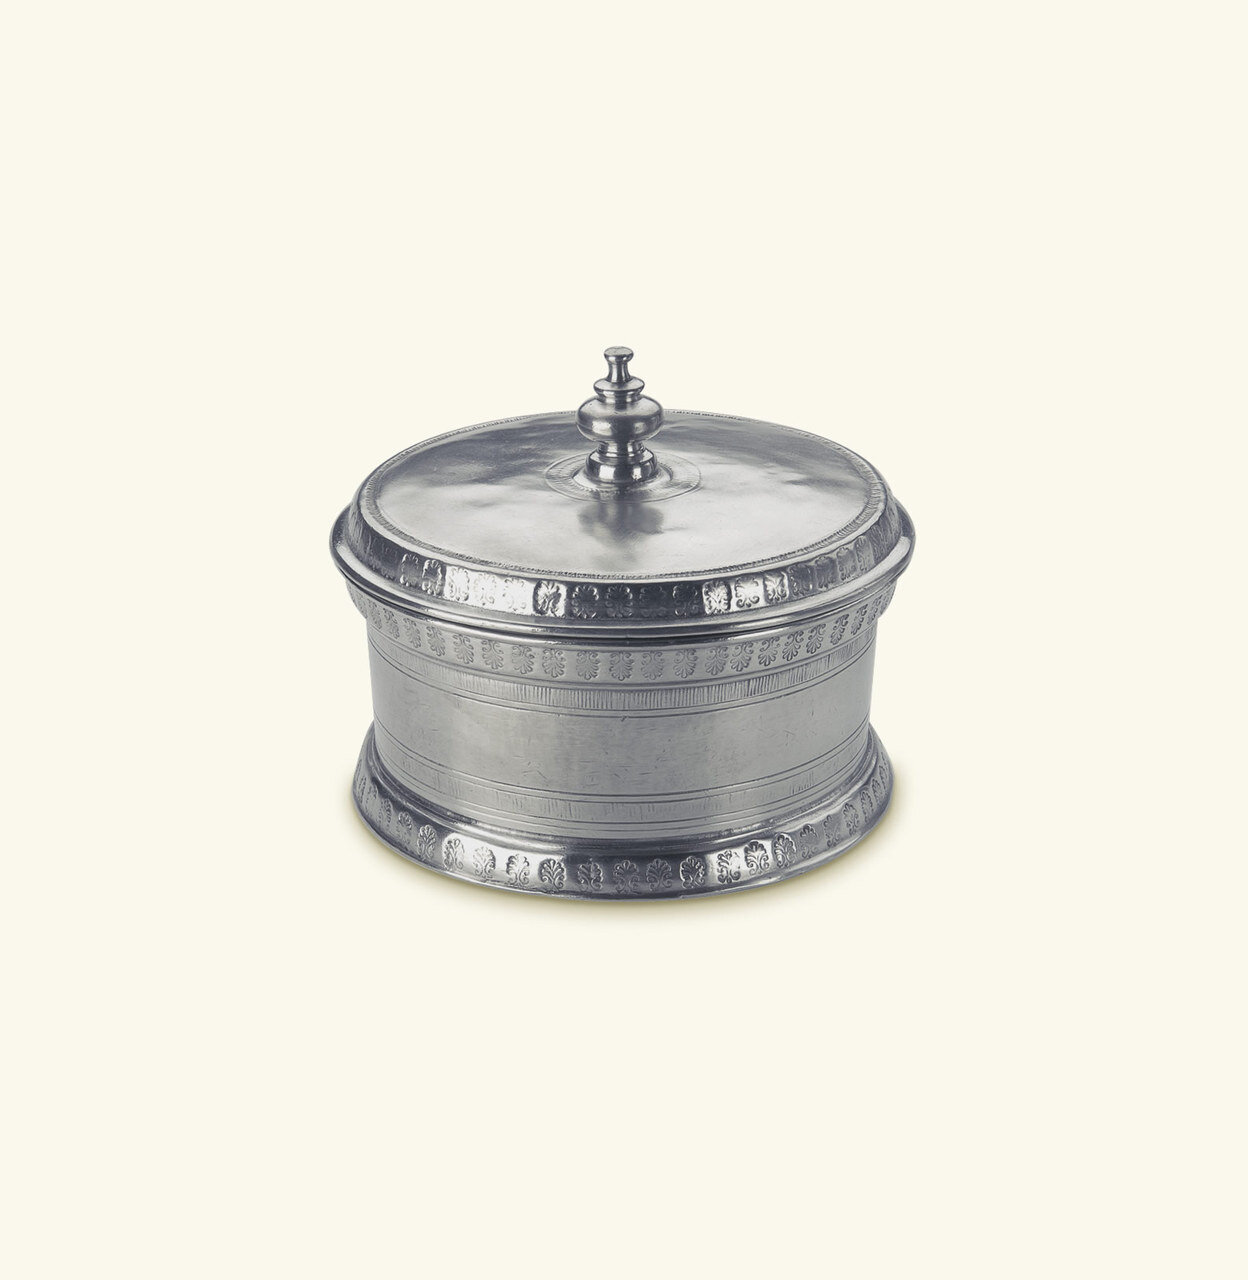 Match Pewter Round Engraved Box a432.0